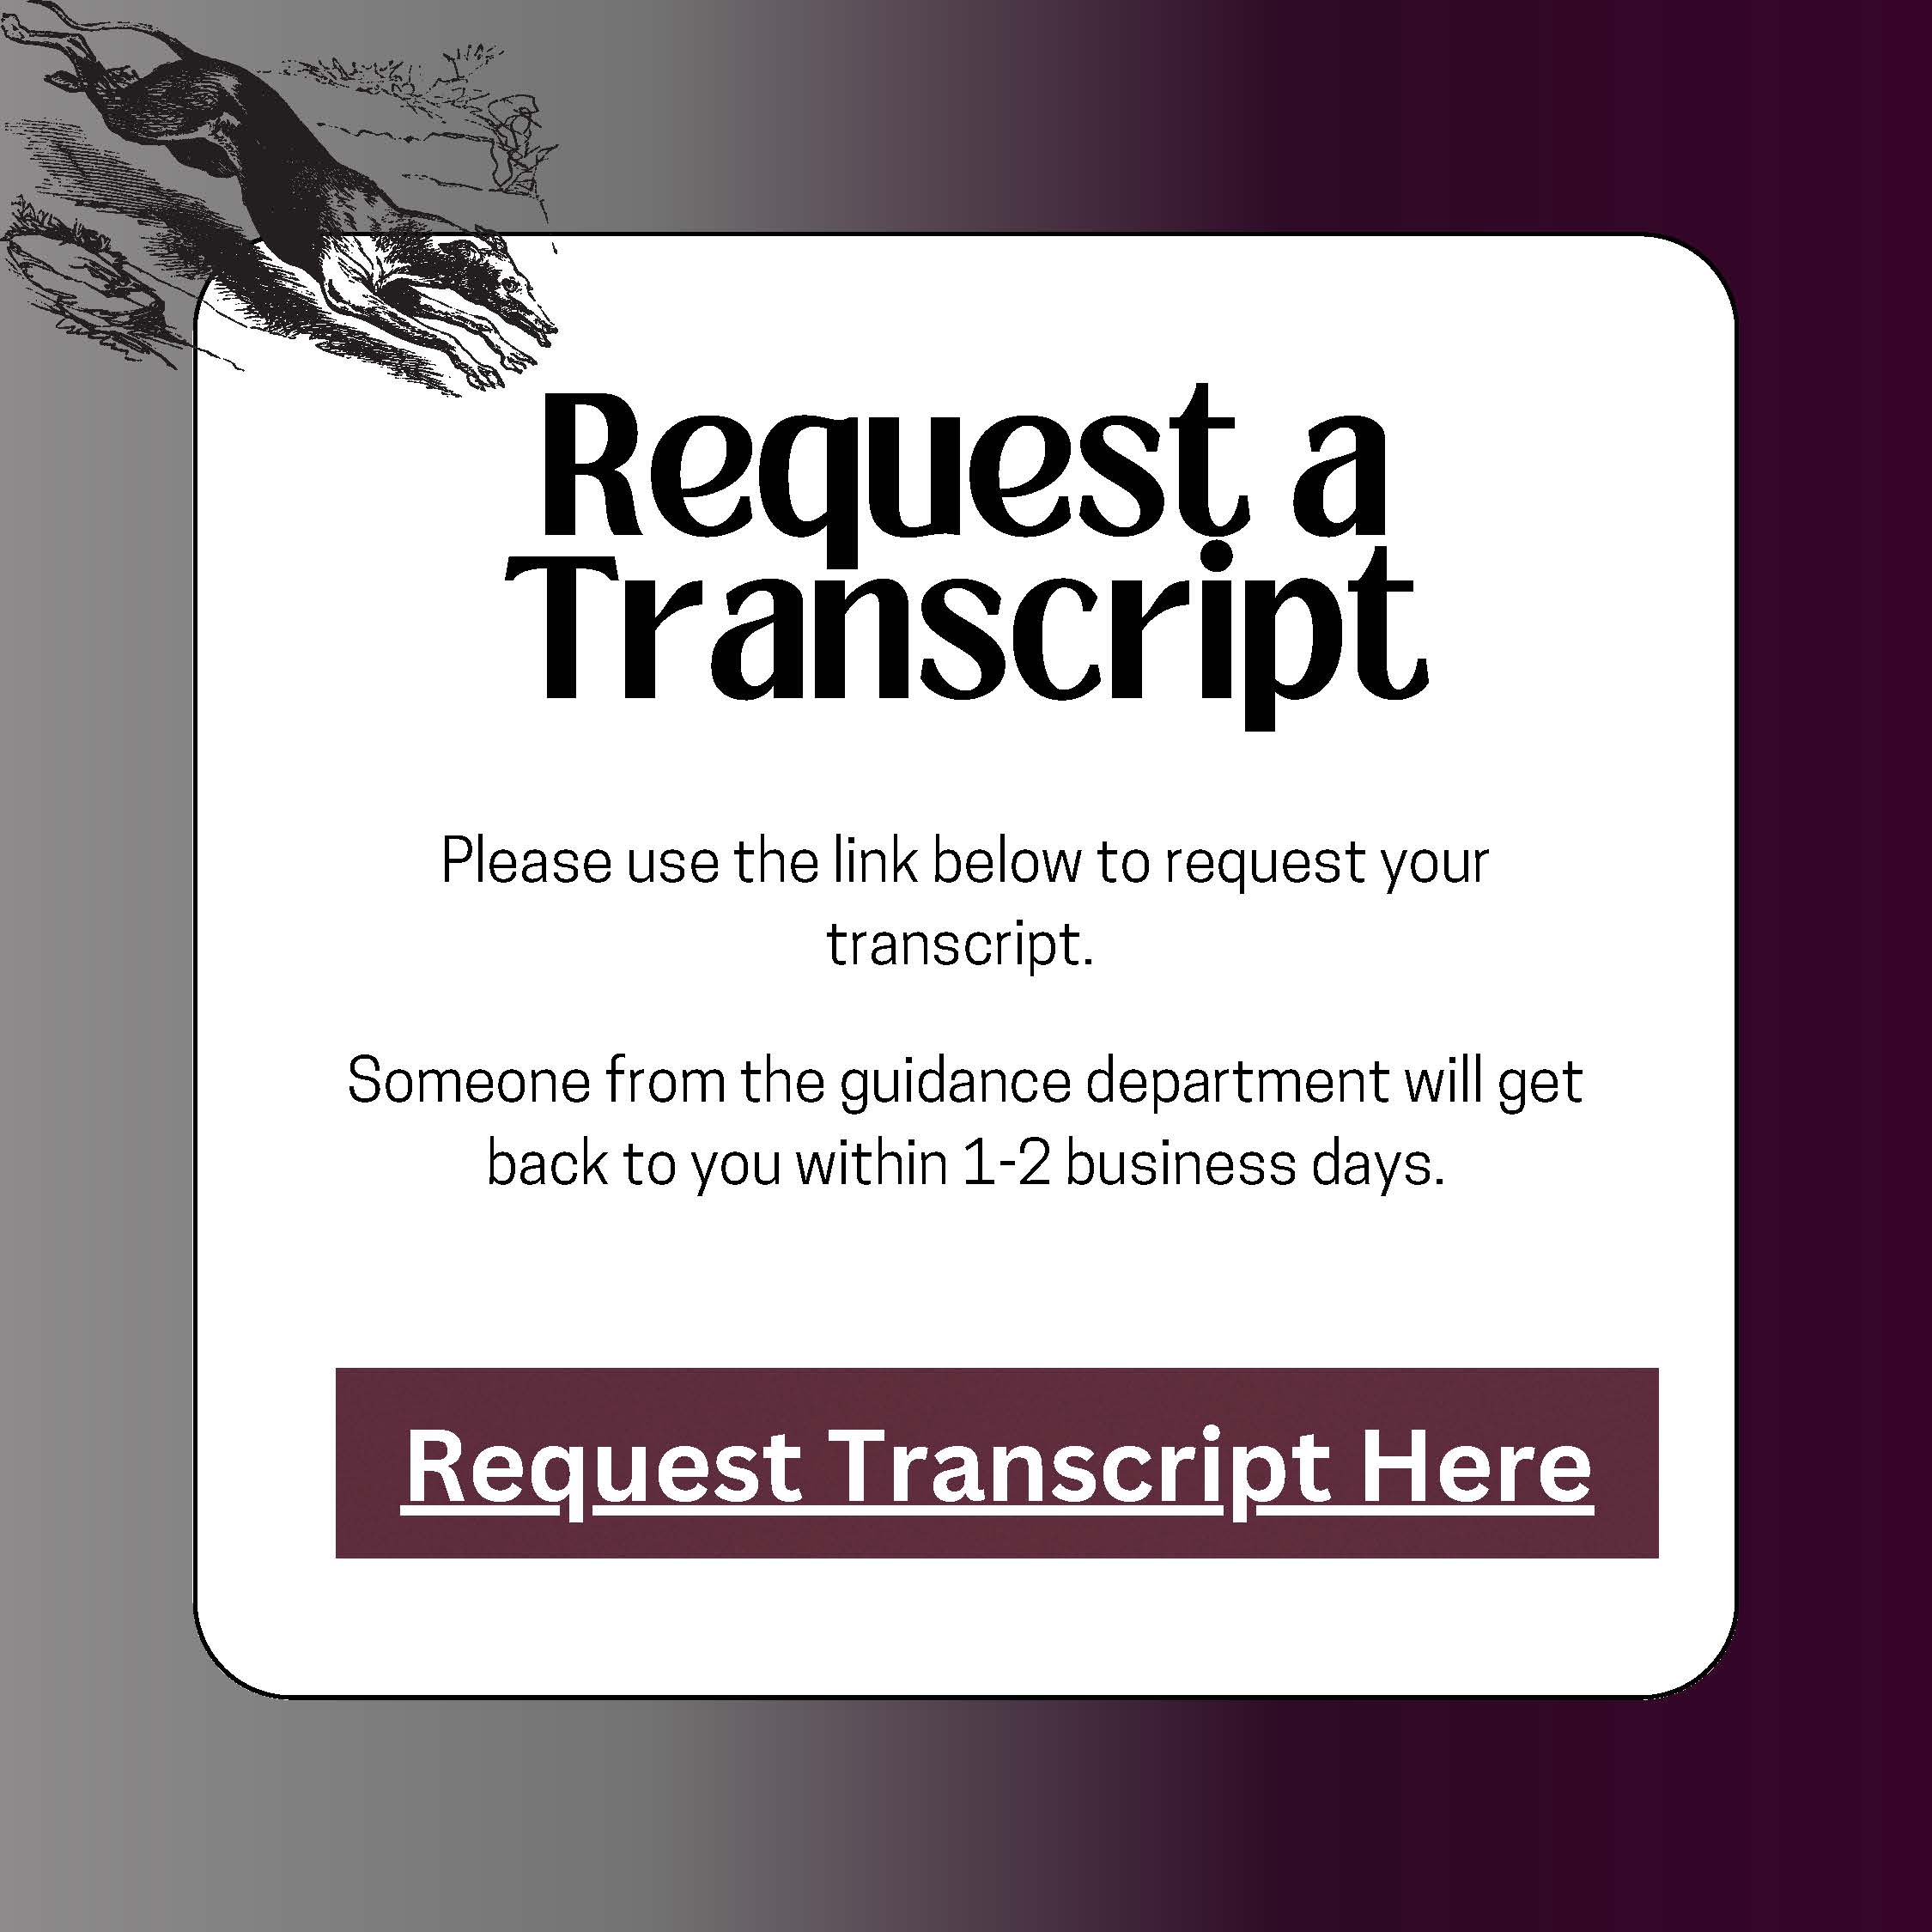 Request a Transcript Please use the link below to request your transcript. Someone from the guidance department will get back to you within 1-2 business days.